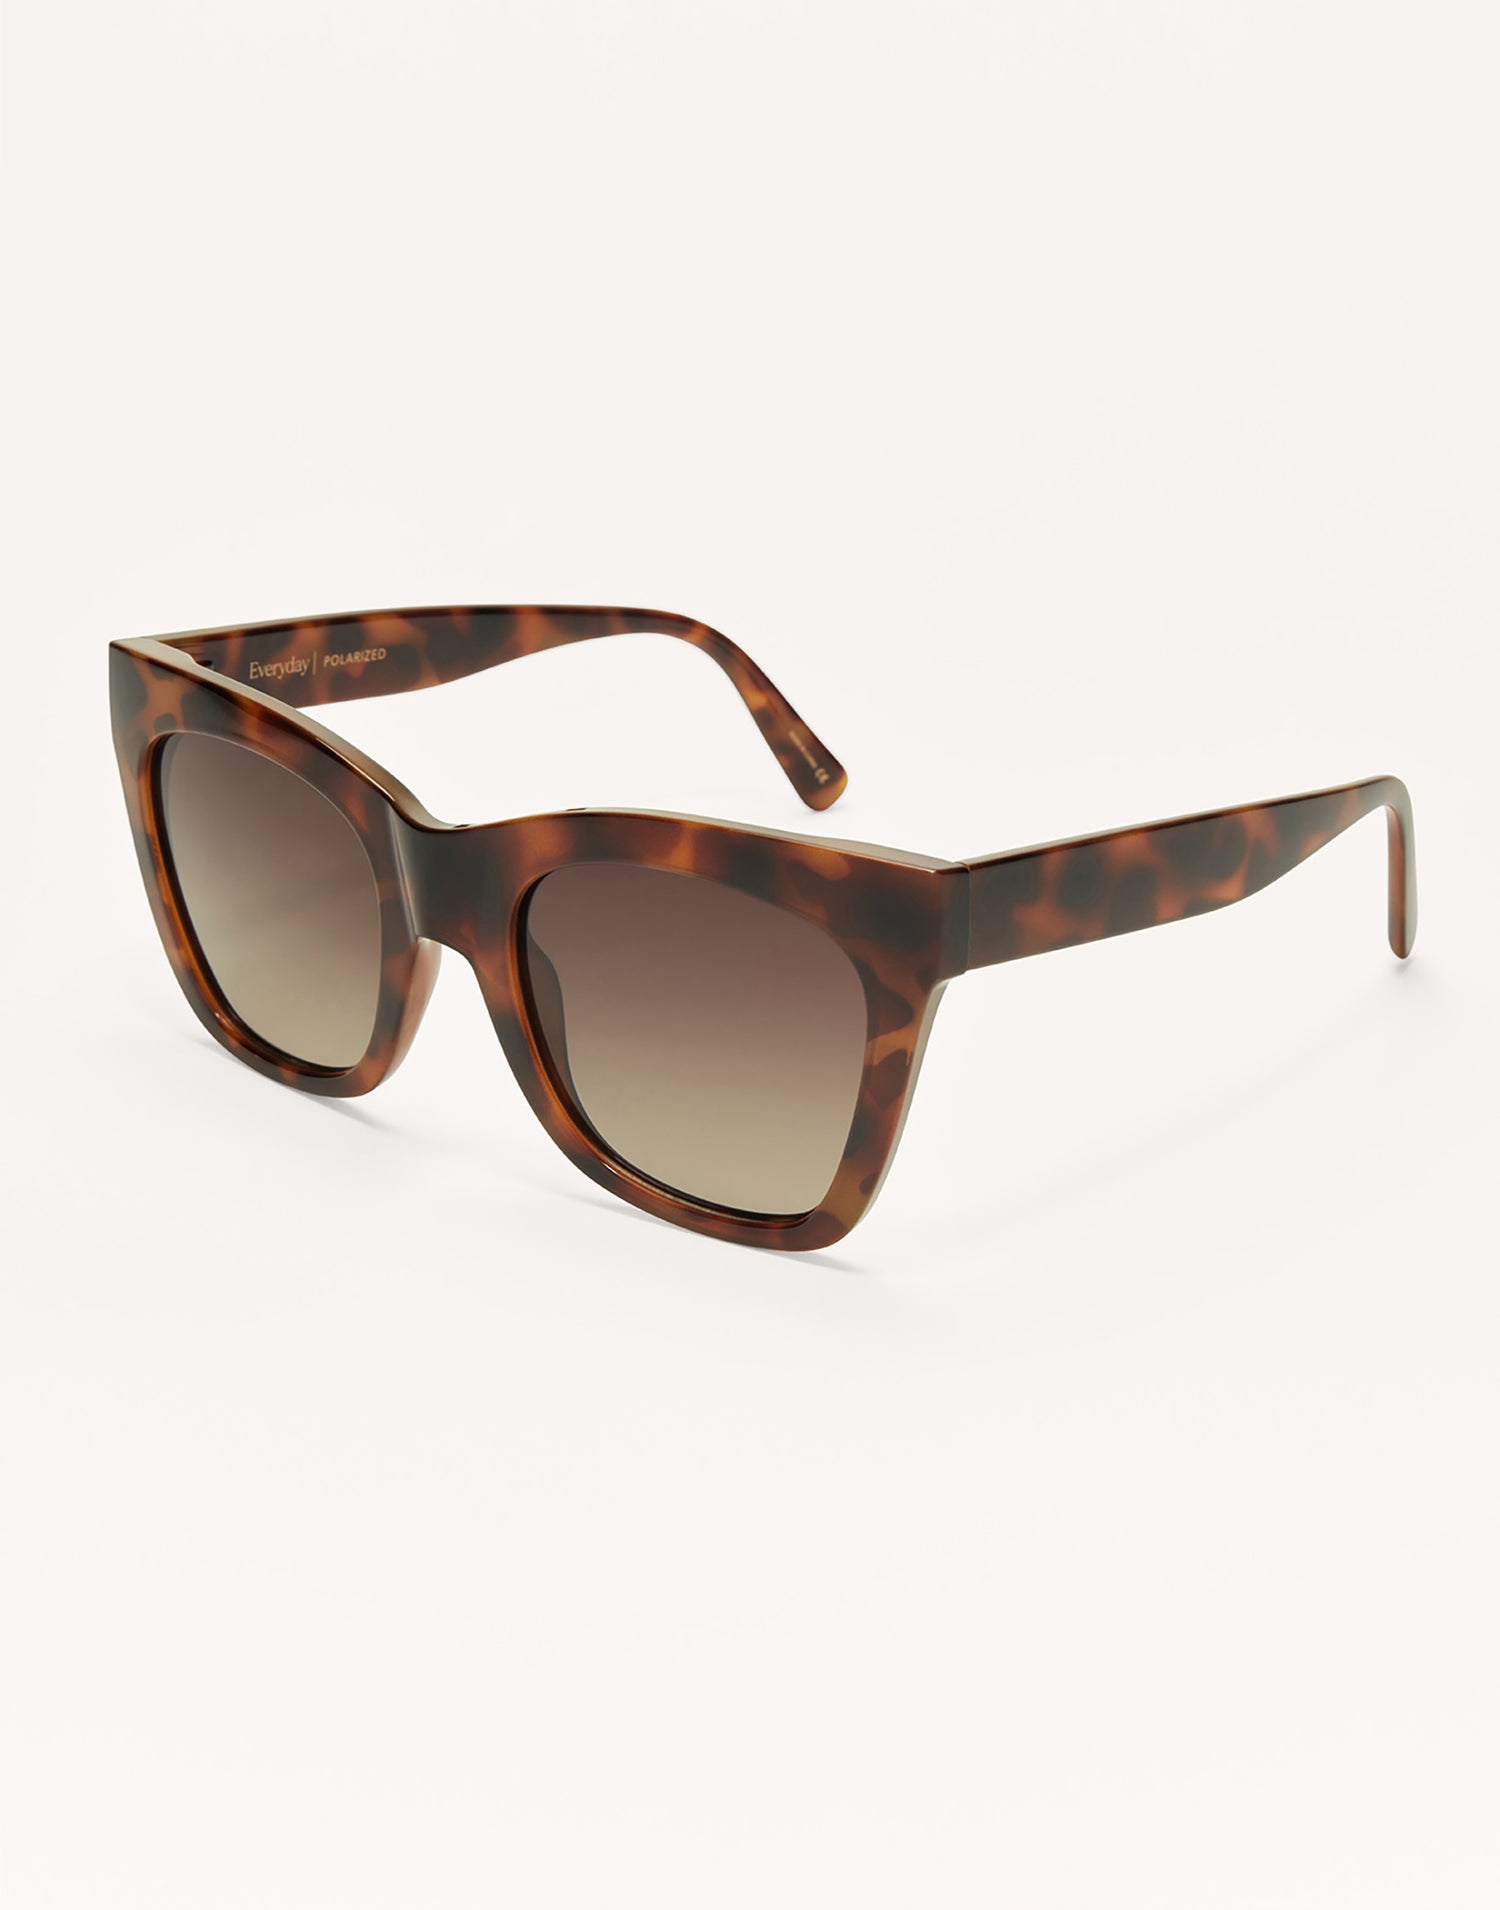 Everyday Sunglasses by Z Supply in Brown Tortoise - Angled View